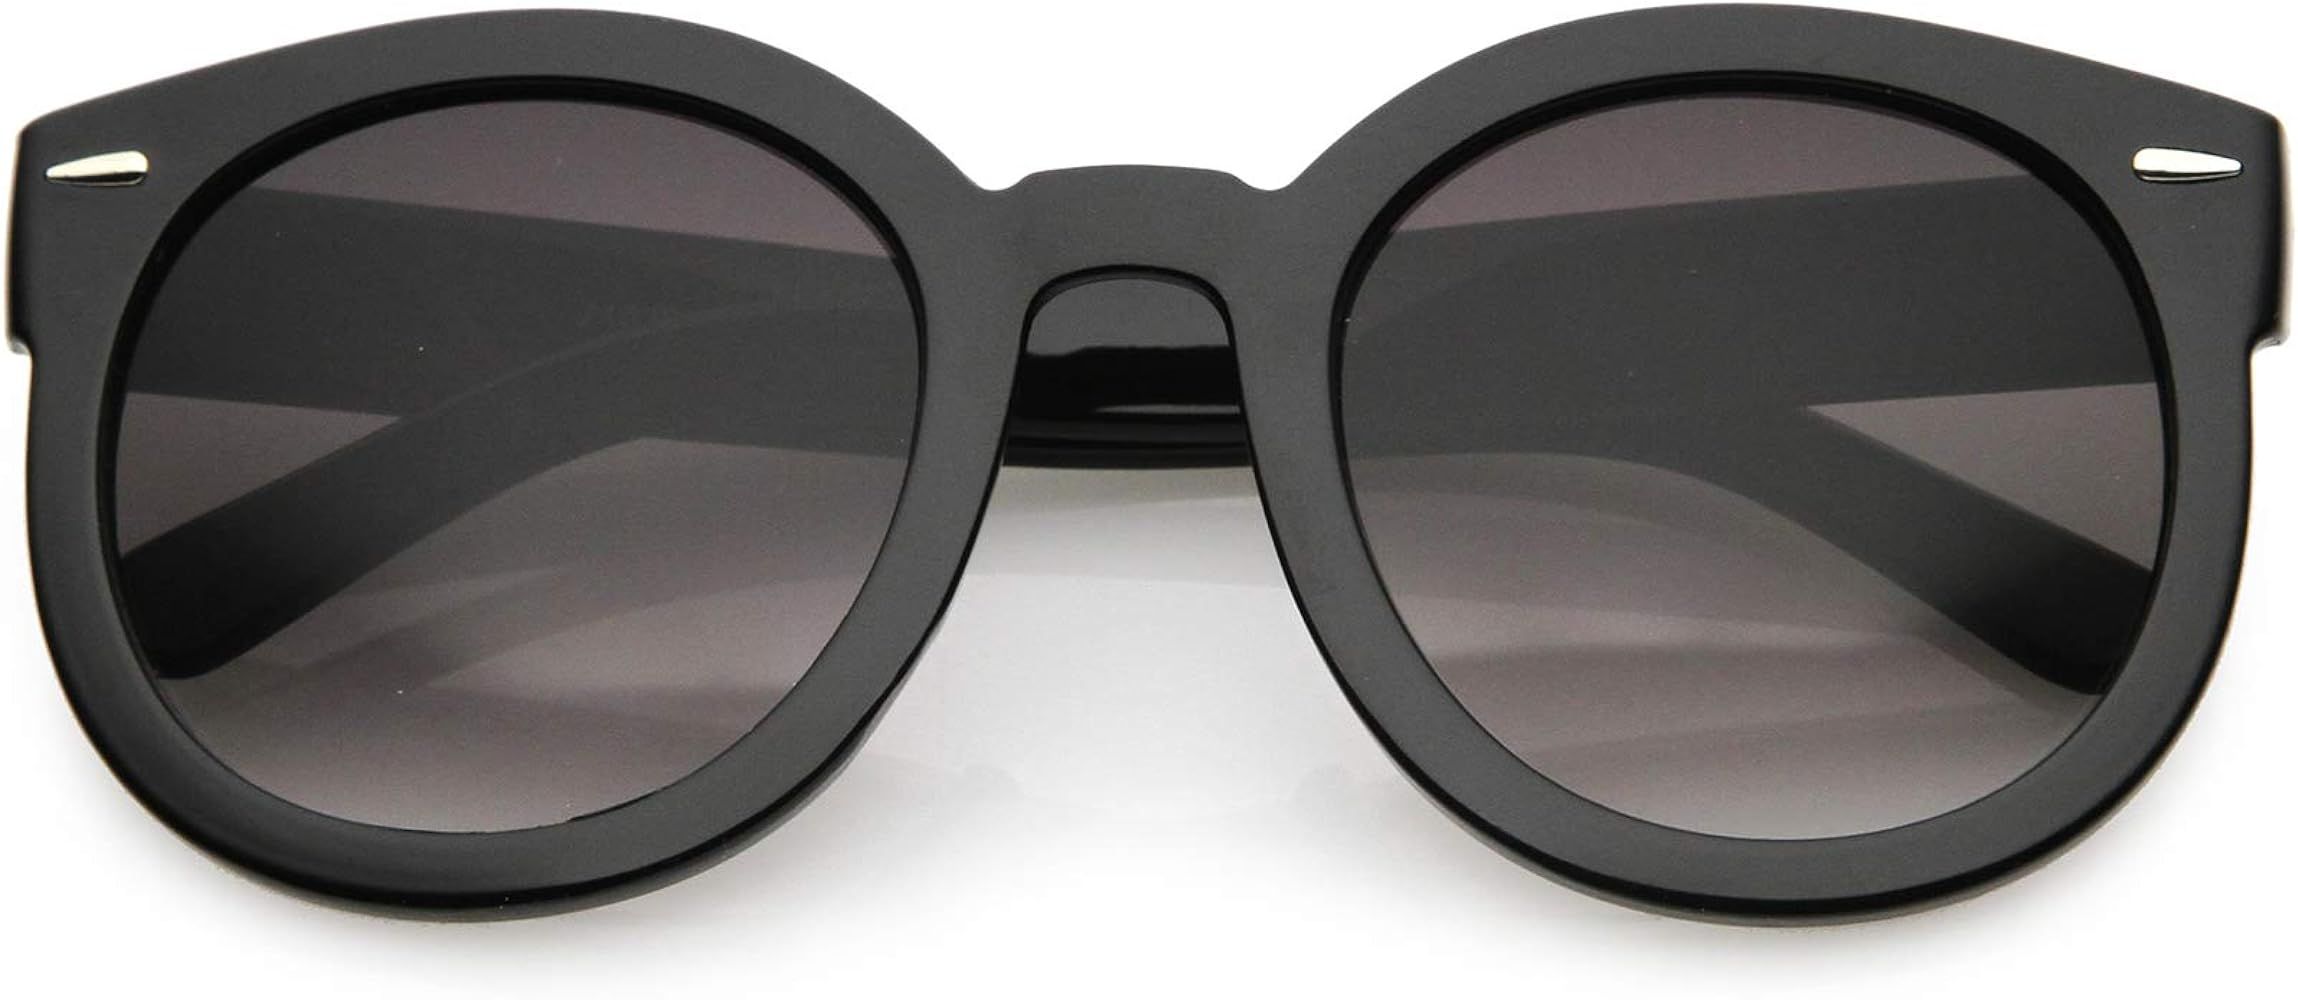 Round Retro Oversized Sunglasses for Women with Colored Mirror and Neutral Lens 53mm | Amazon (US)